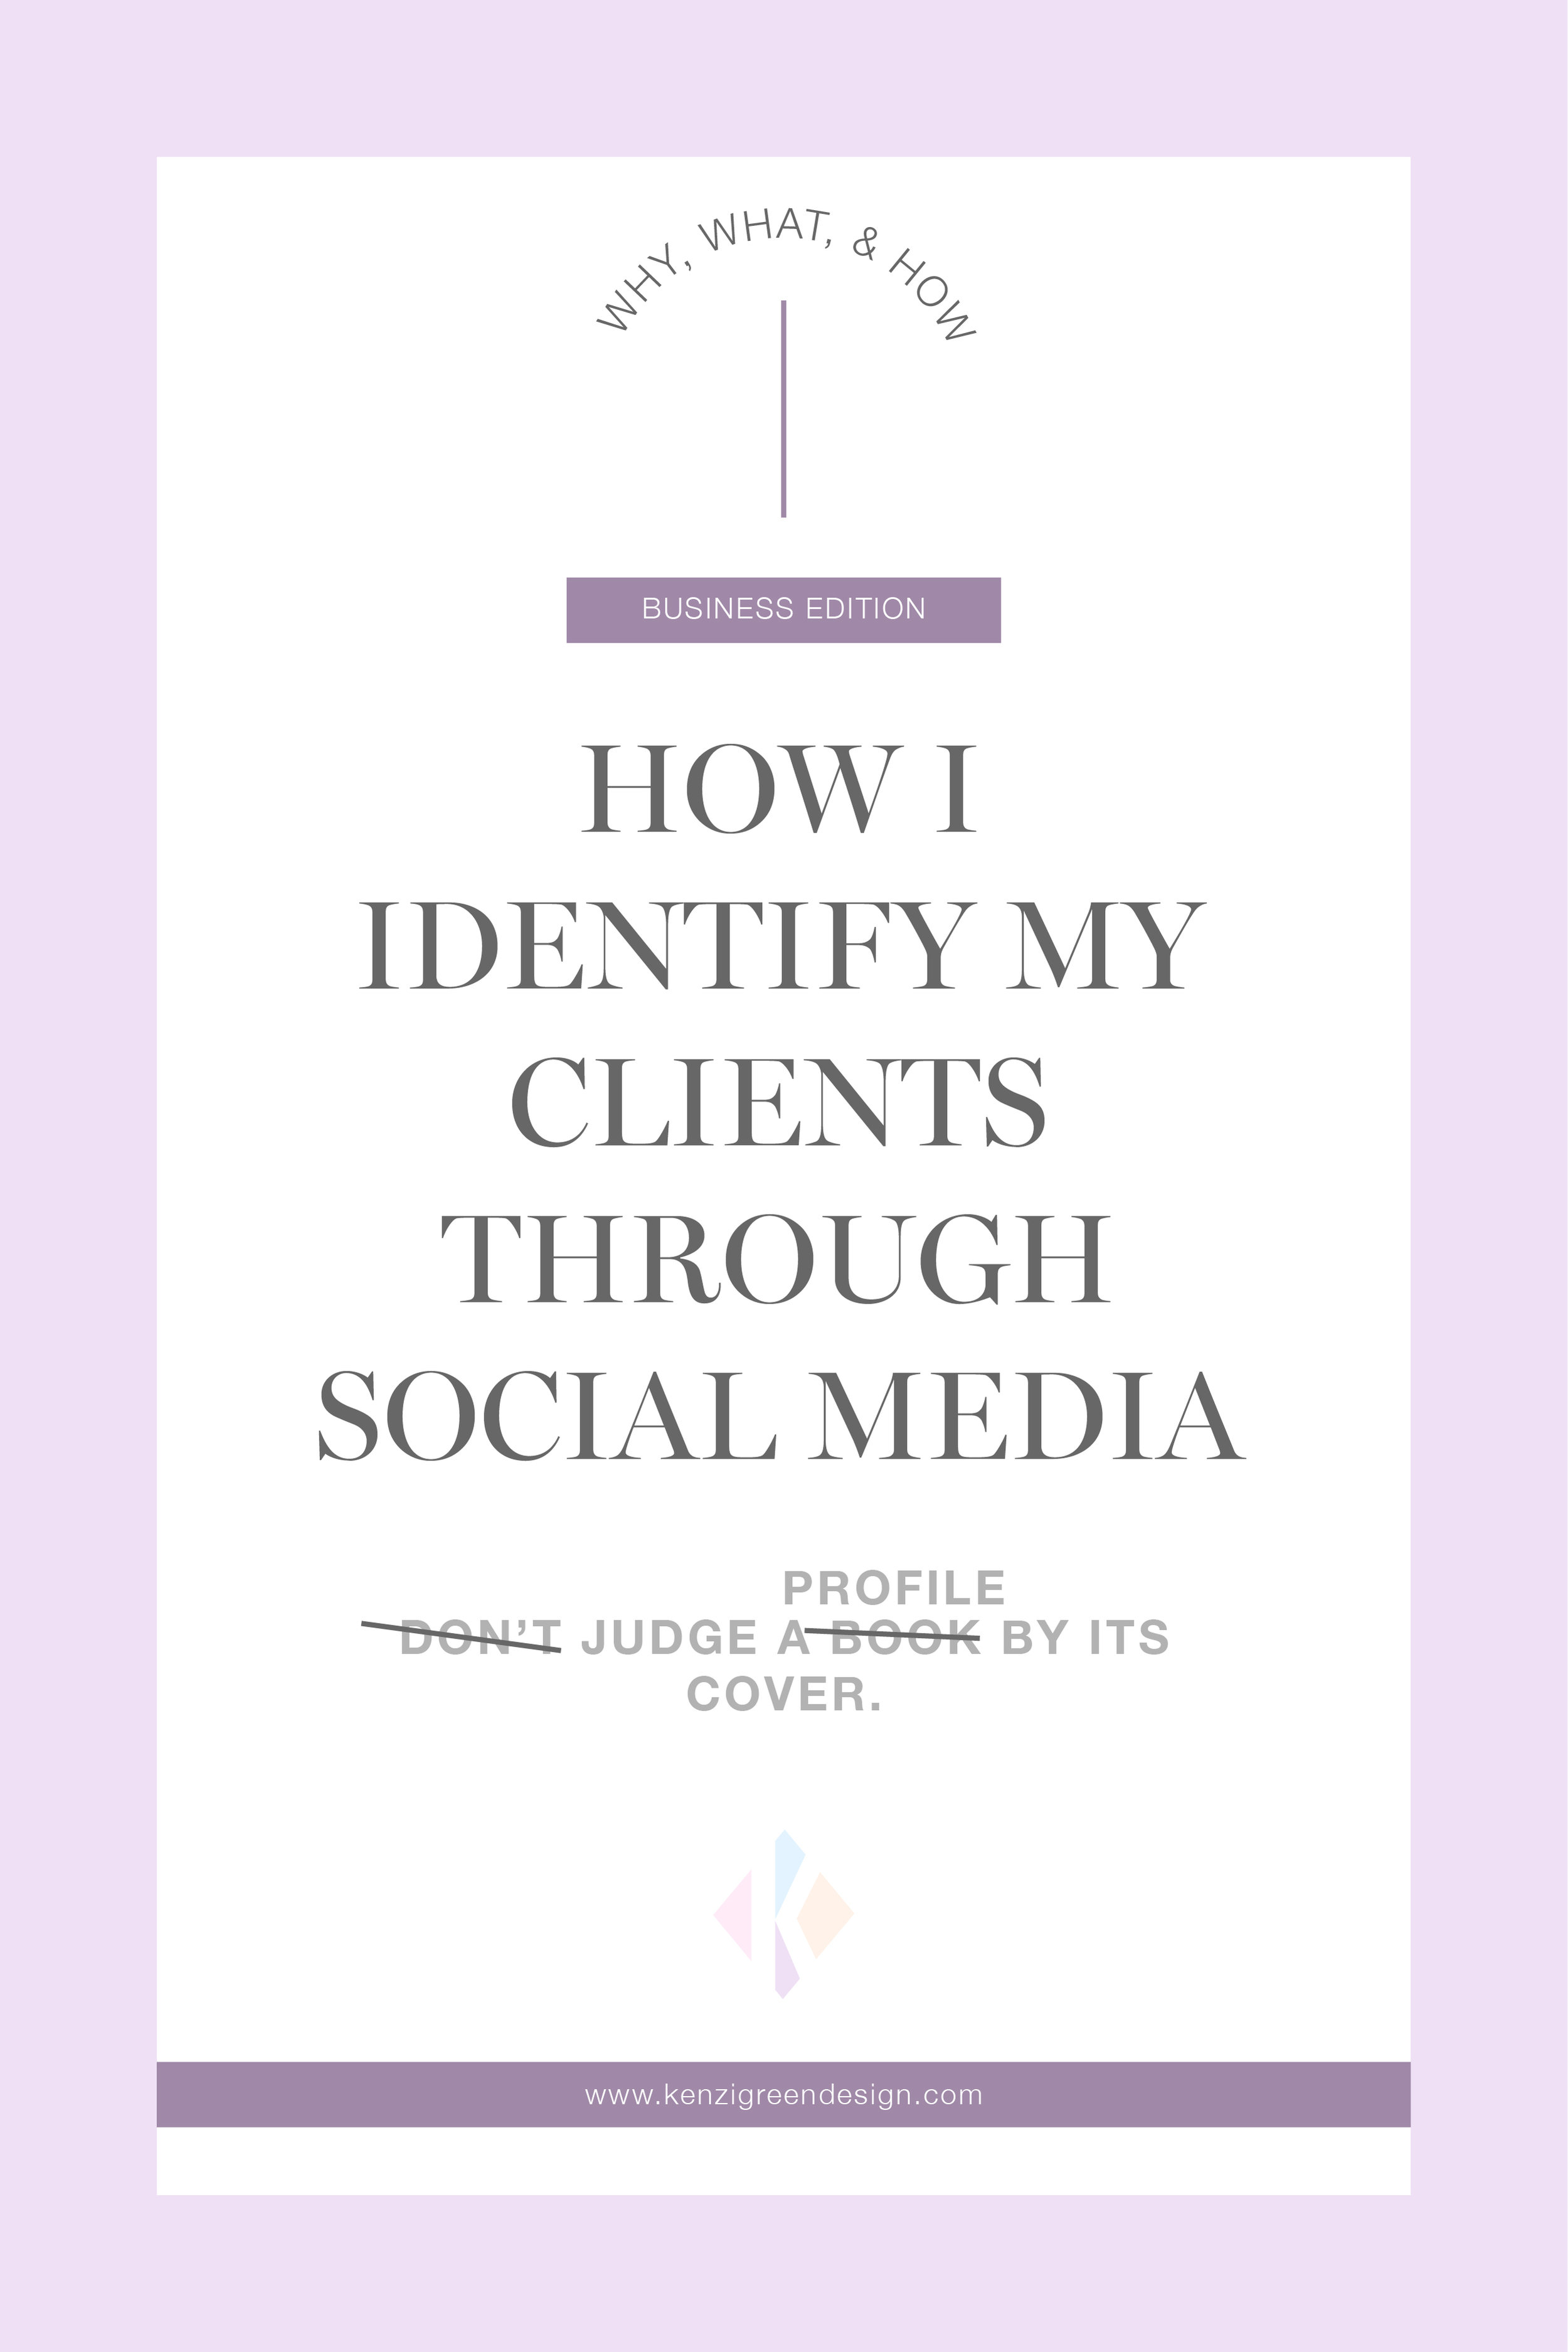 How I Identify My Clients Through Social Media #branding #businesstips #howtofindclients #businessstrategy